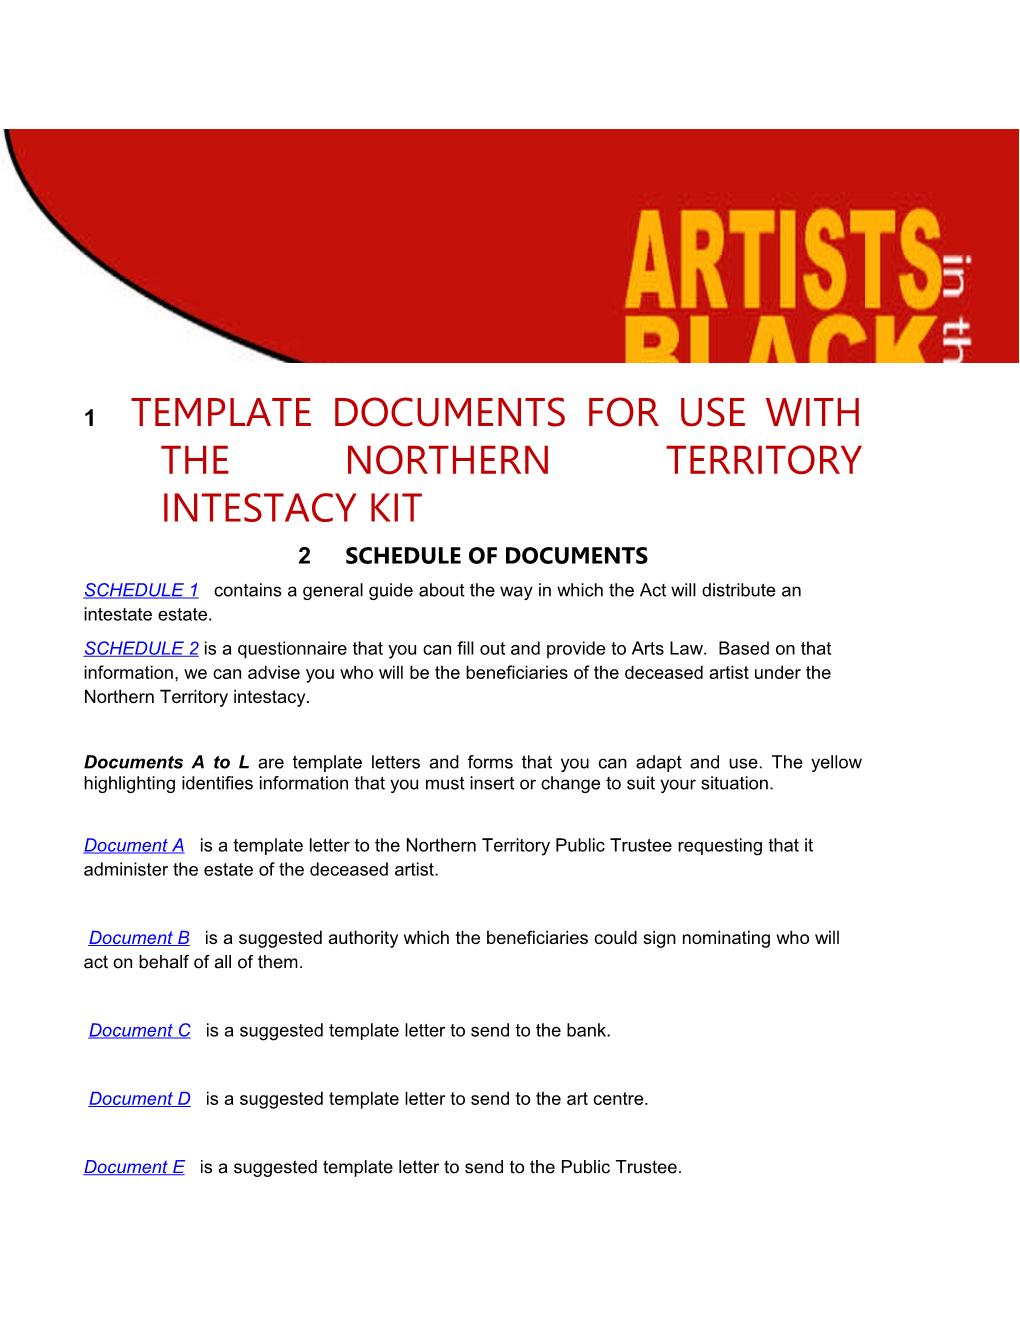 Templatedocuments for Use with the Northern Territory Intestacy Kit